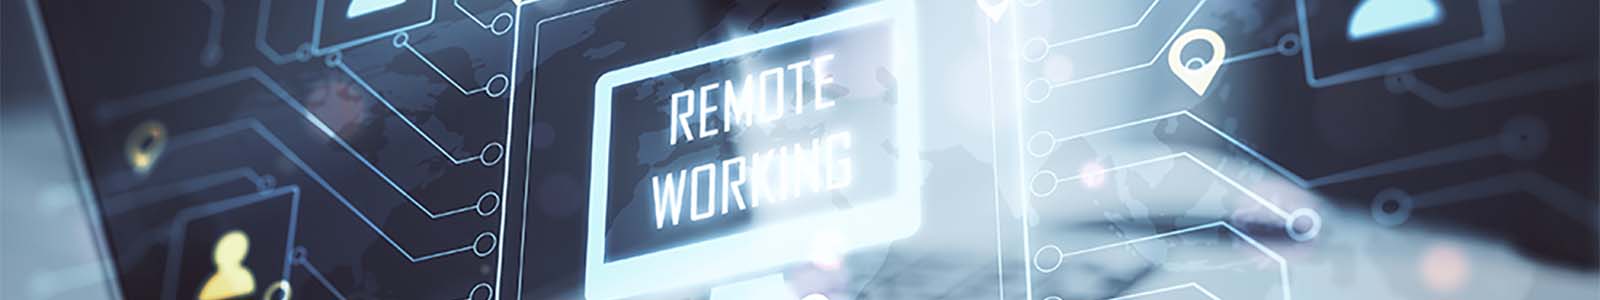 The role of technology in the modern business for supporting remote work